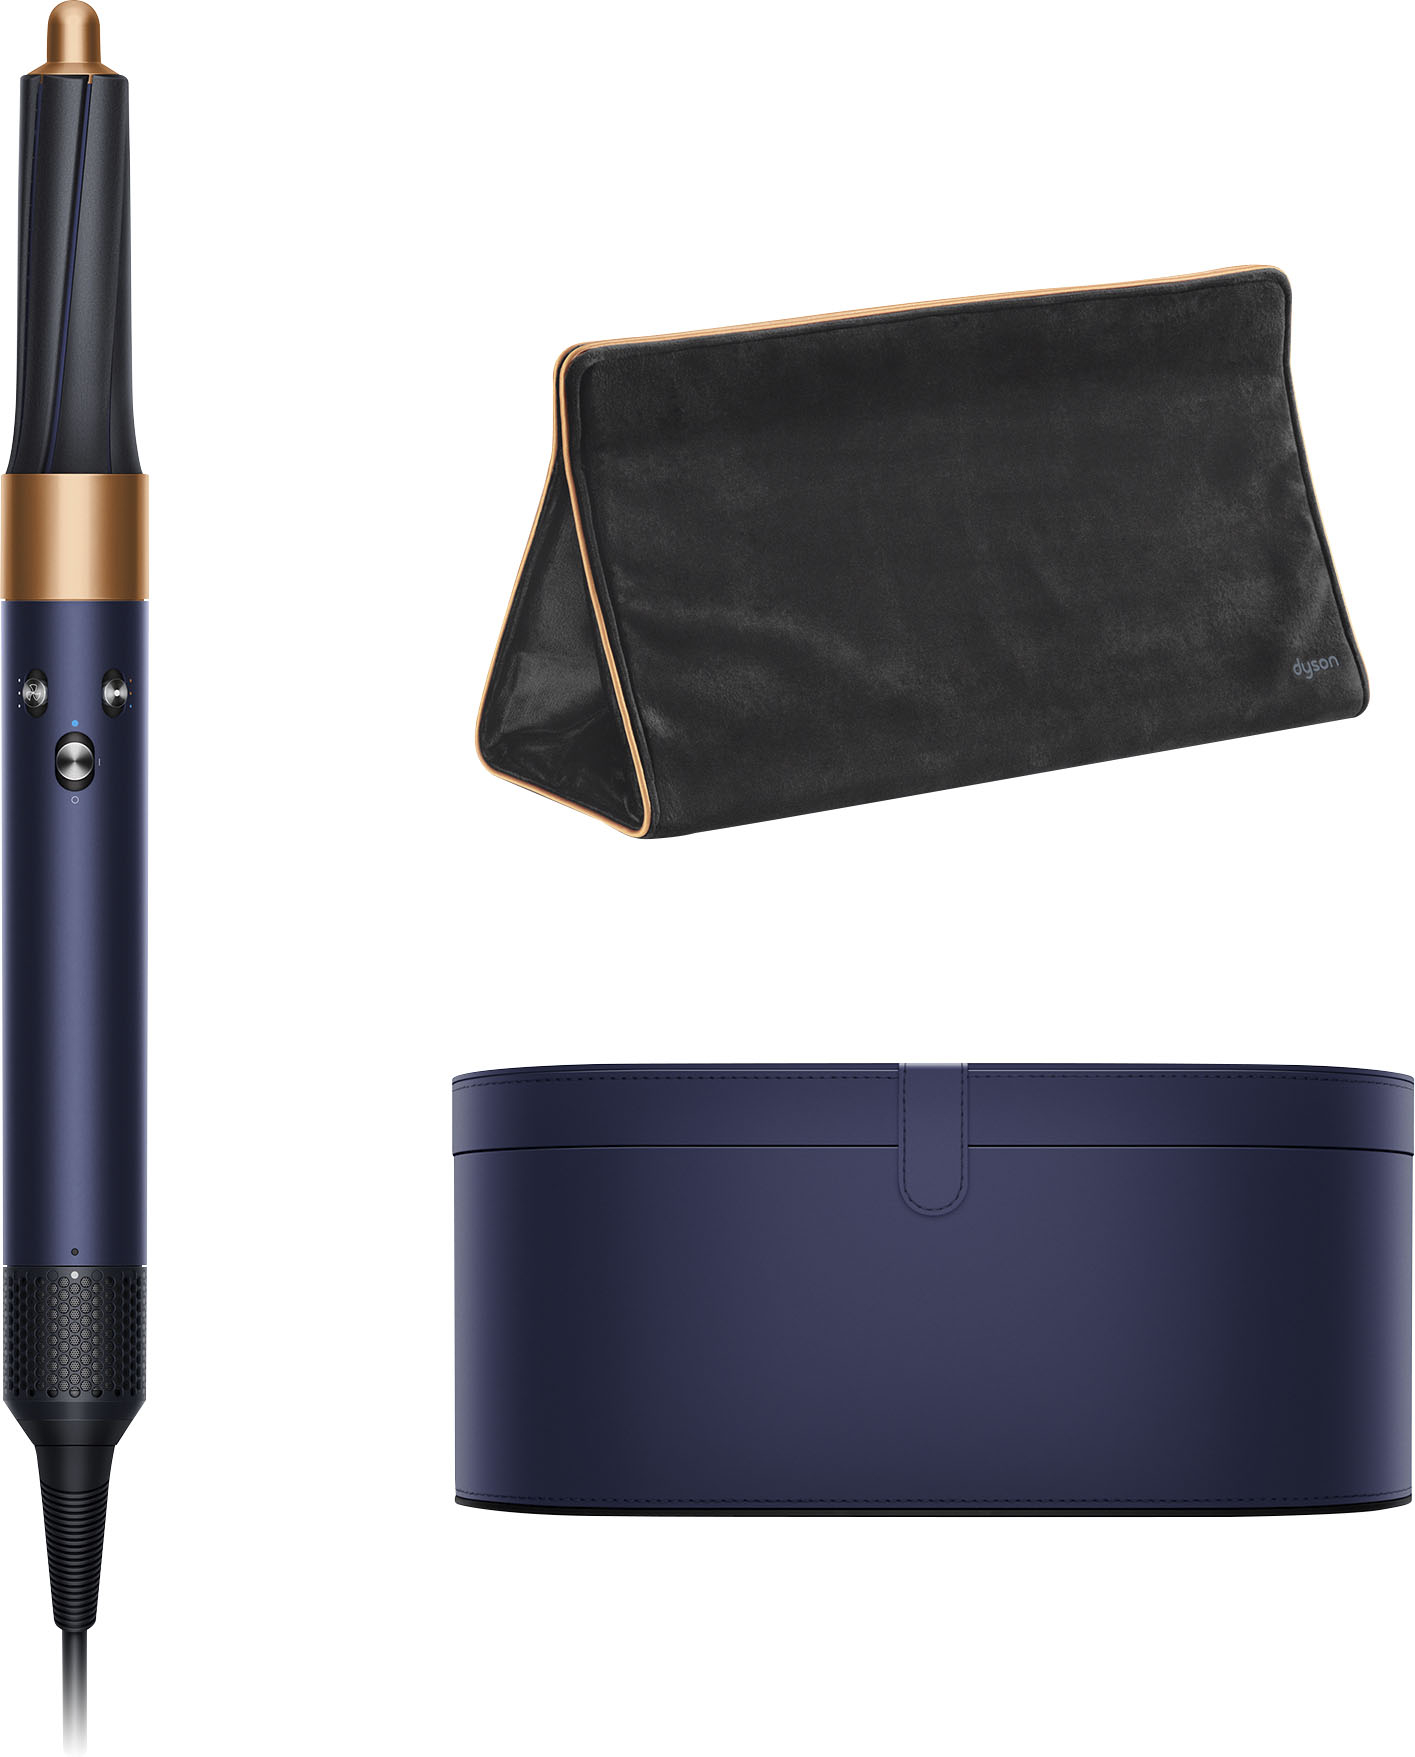 Best Buy: New special edition Dyson Airwrap styler complete 